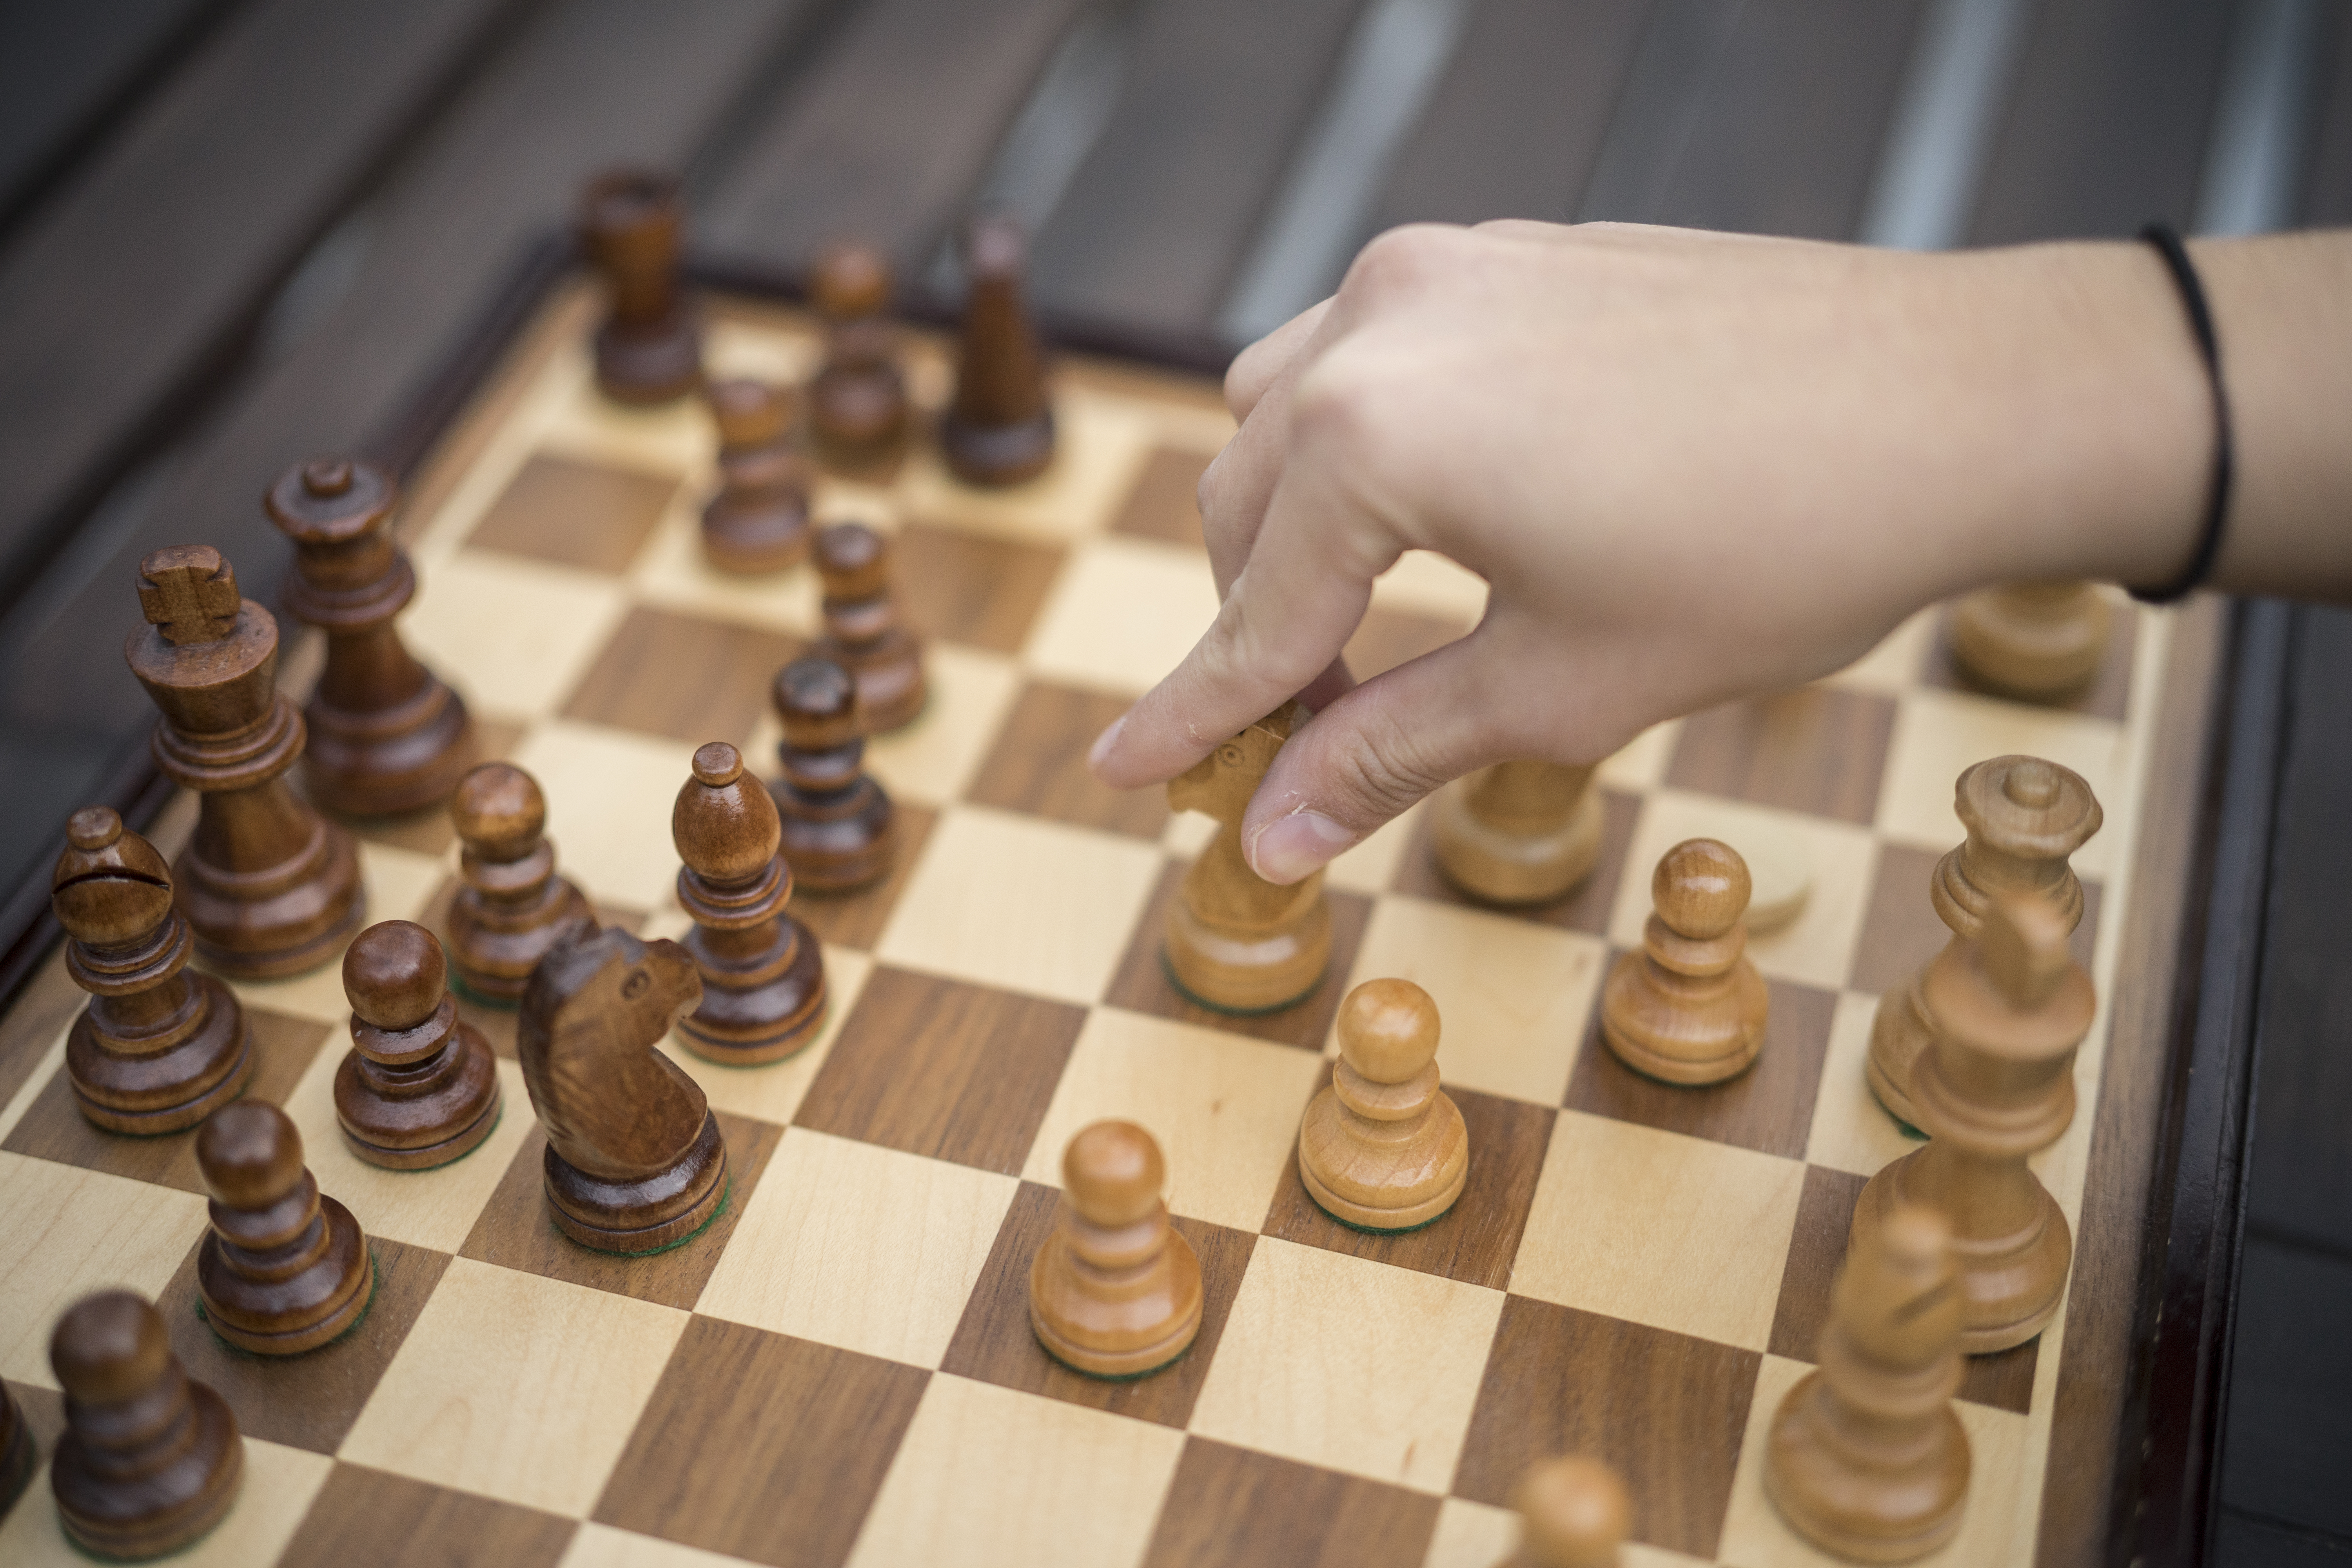 The Queen's Gambit, the Chess Boom, and the Future of Chess – Michigan  Journal of Economics